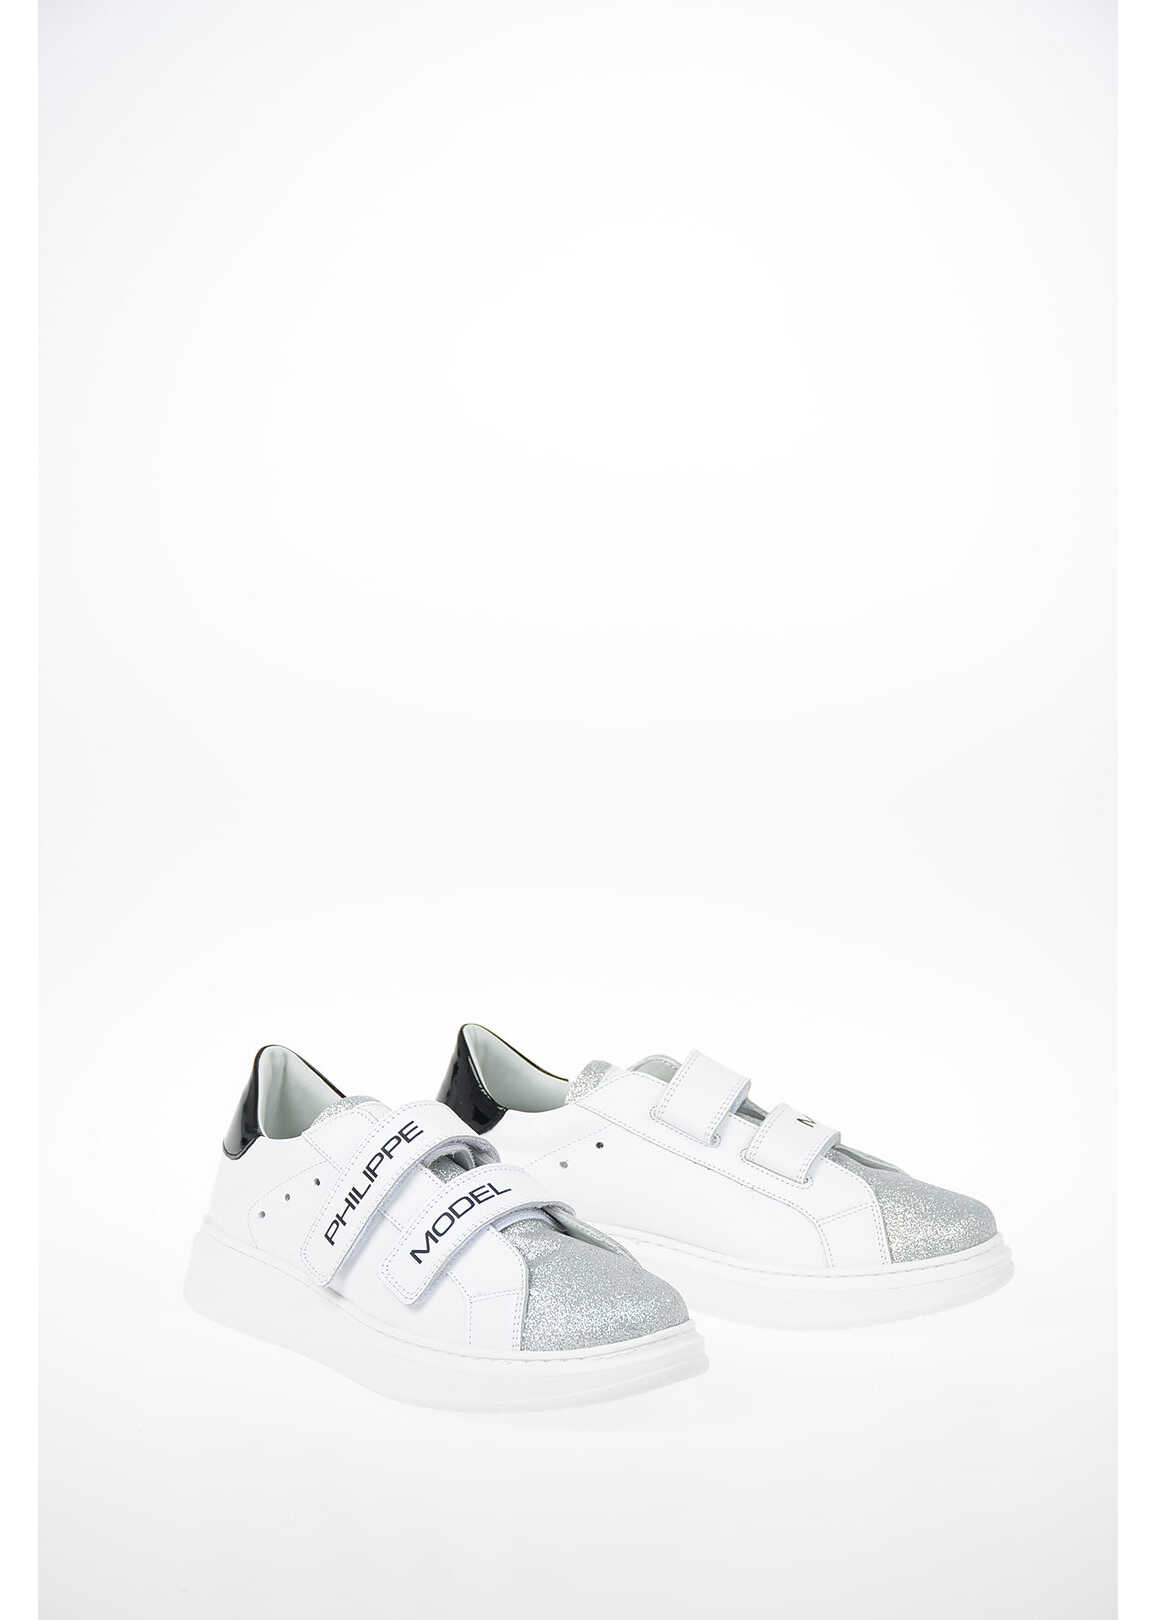 Philippe Model Leather Glittered Granville Sneakers White